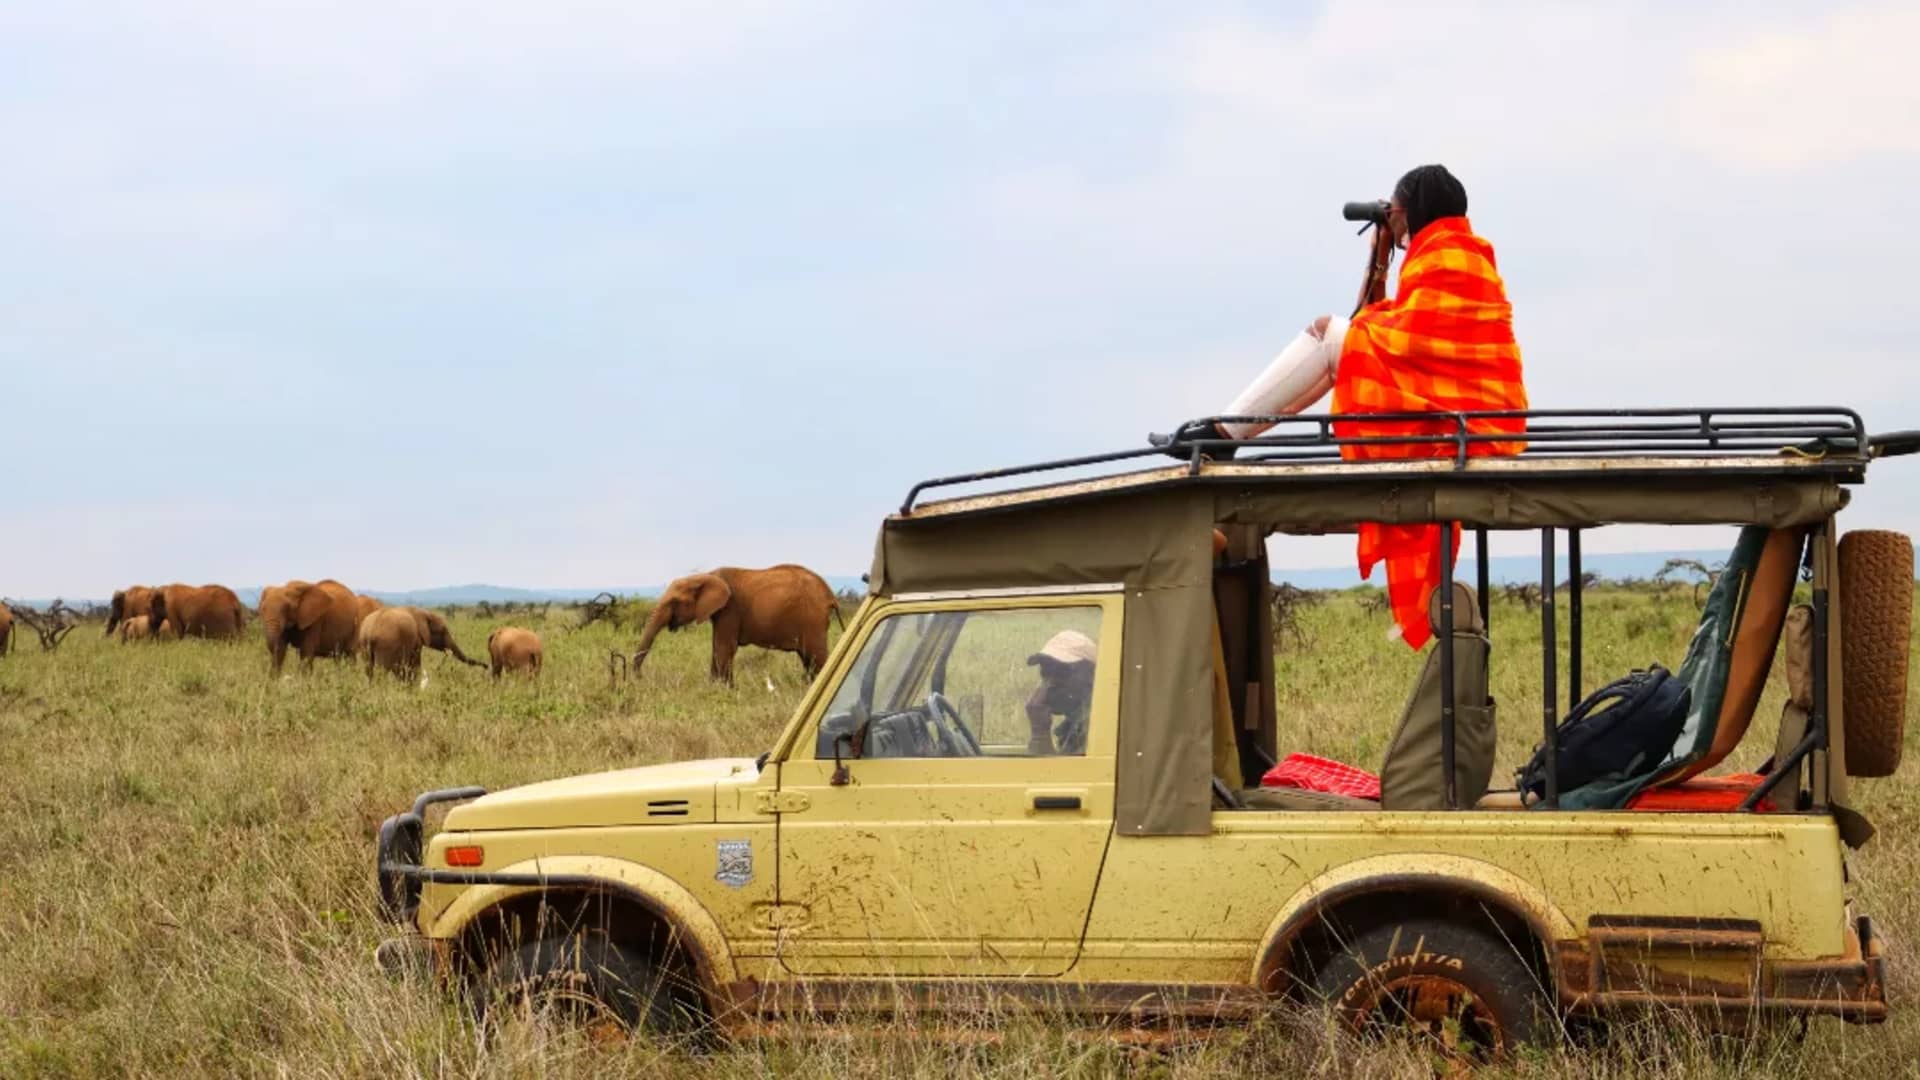 Travel journalist Harriet Akinyi watches a herd of elephants in a game drive at Mugie Conservancy, Kenya.